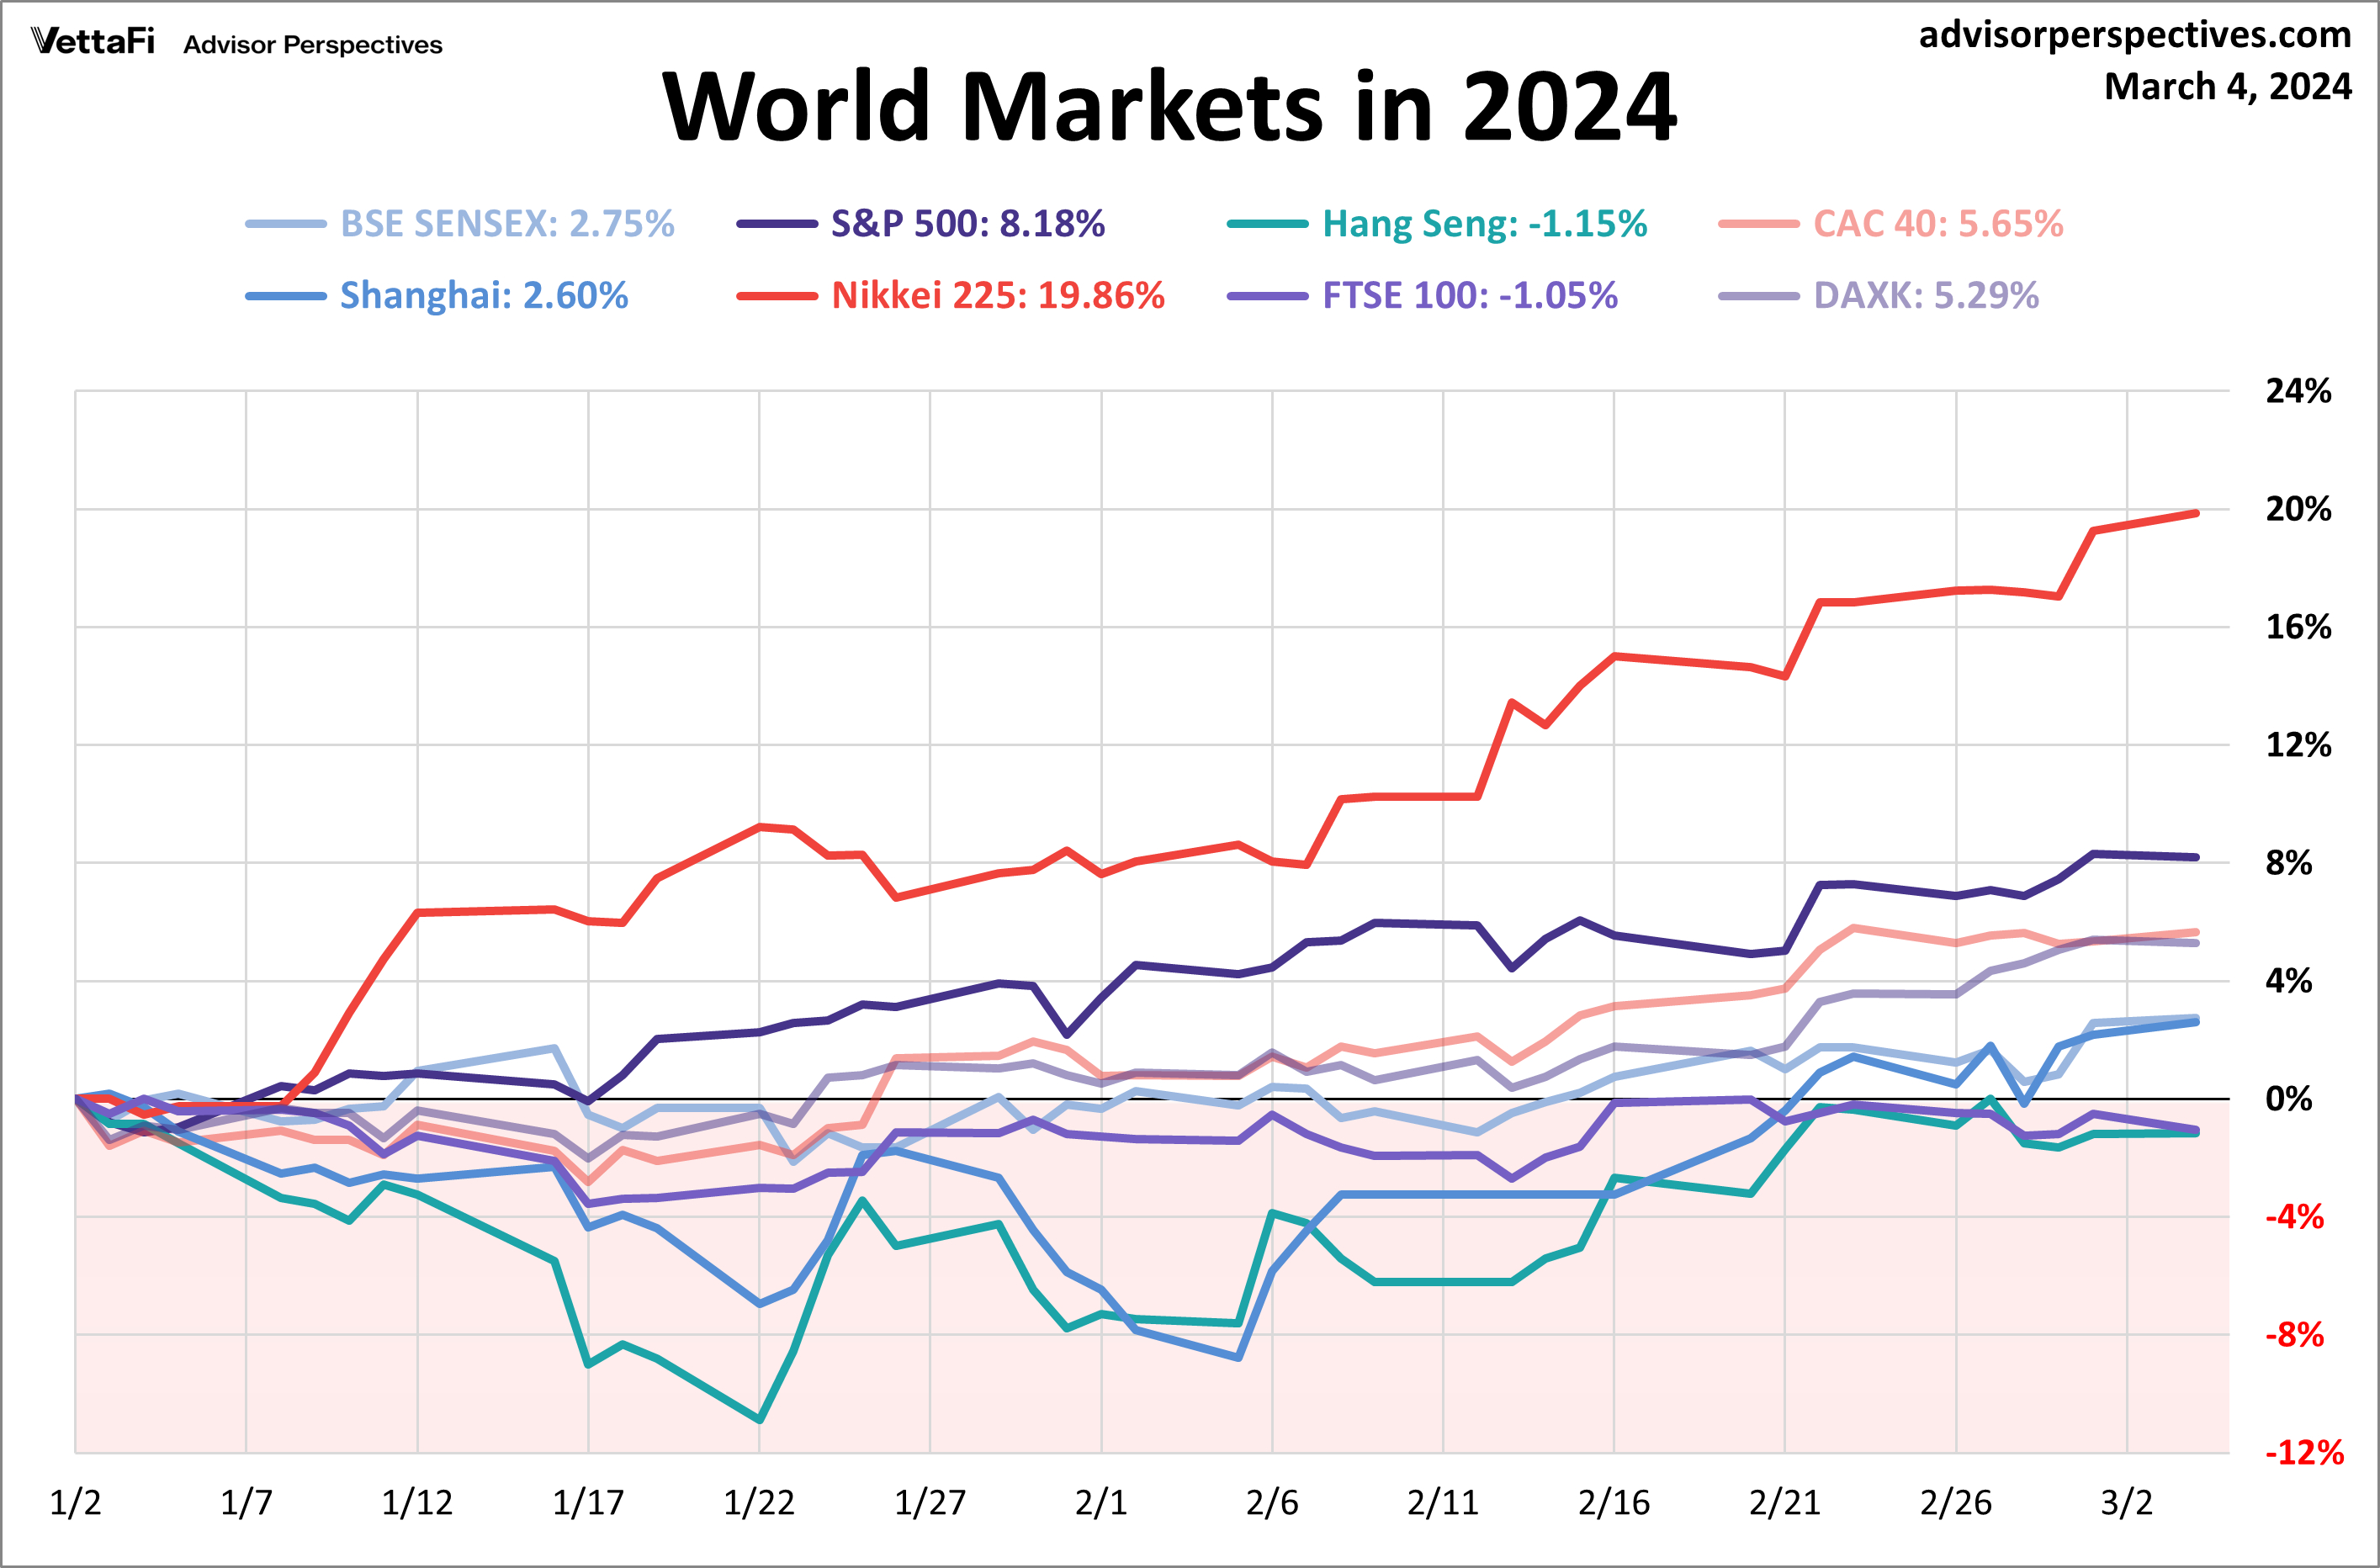 World Indexes in 2024